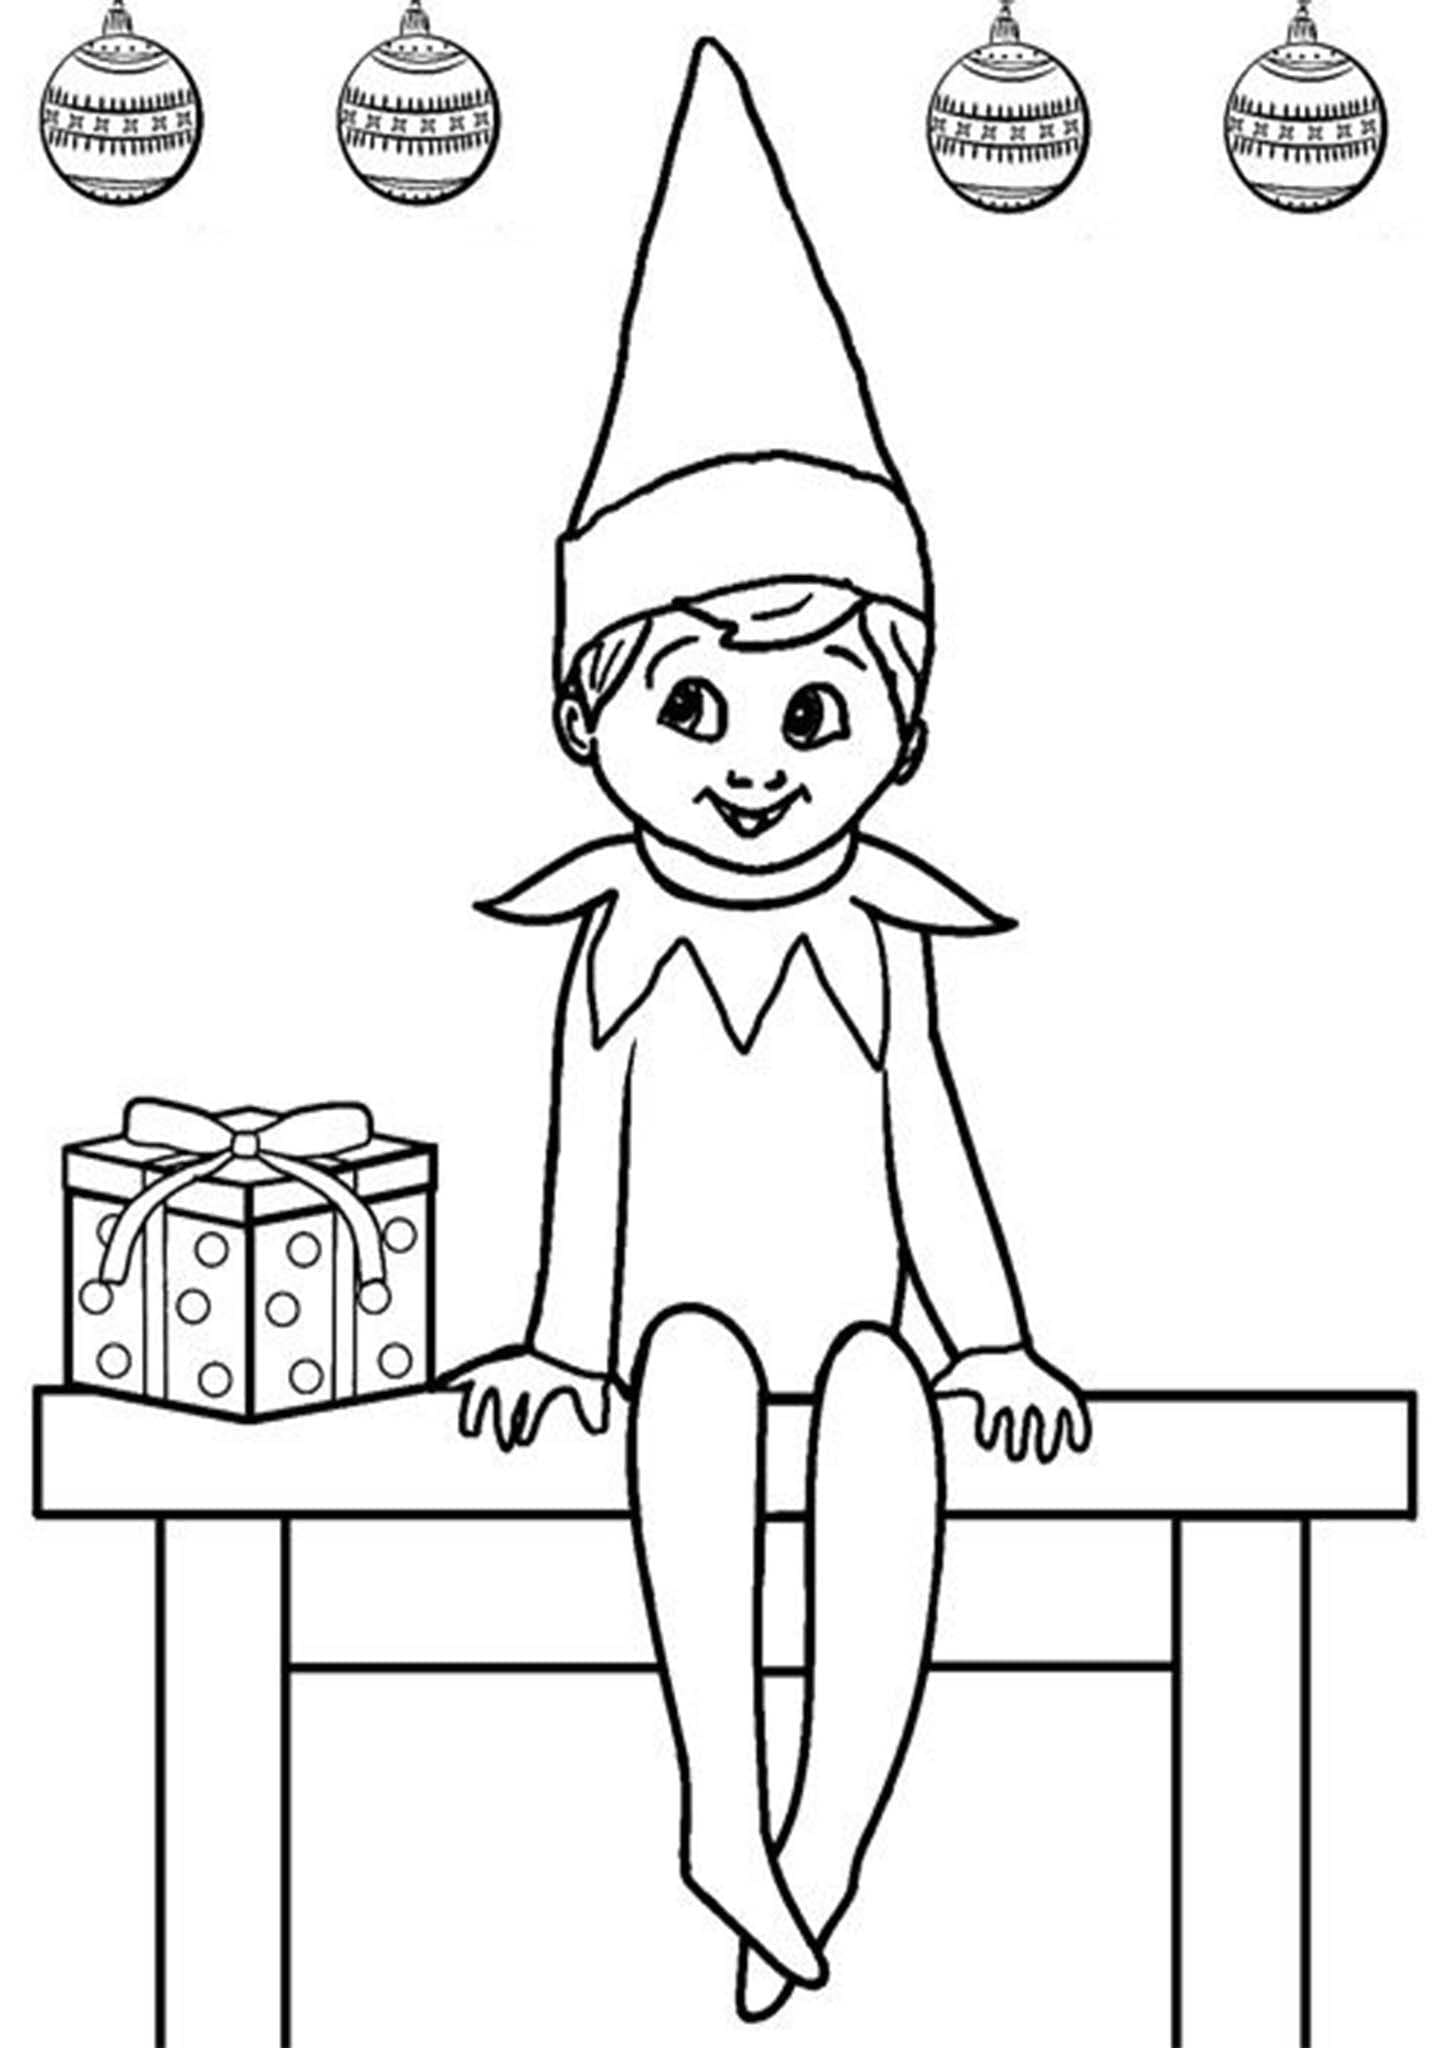 children-s-day-coloring-pages-coloringlib